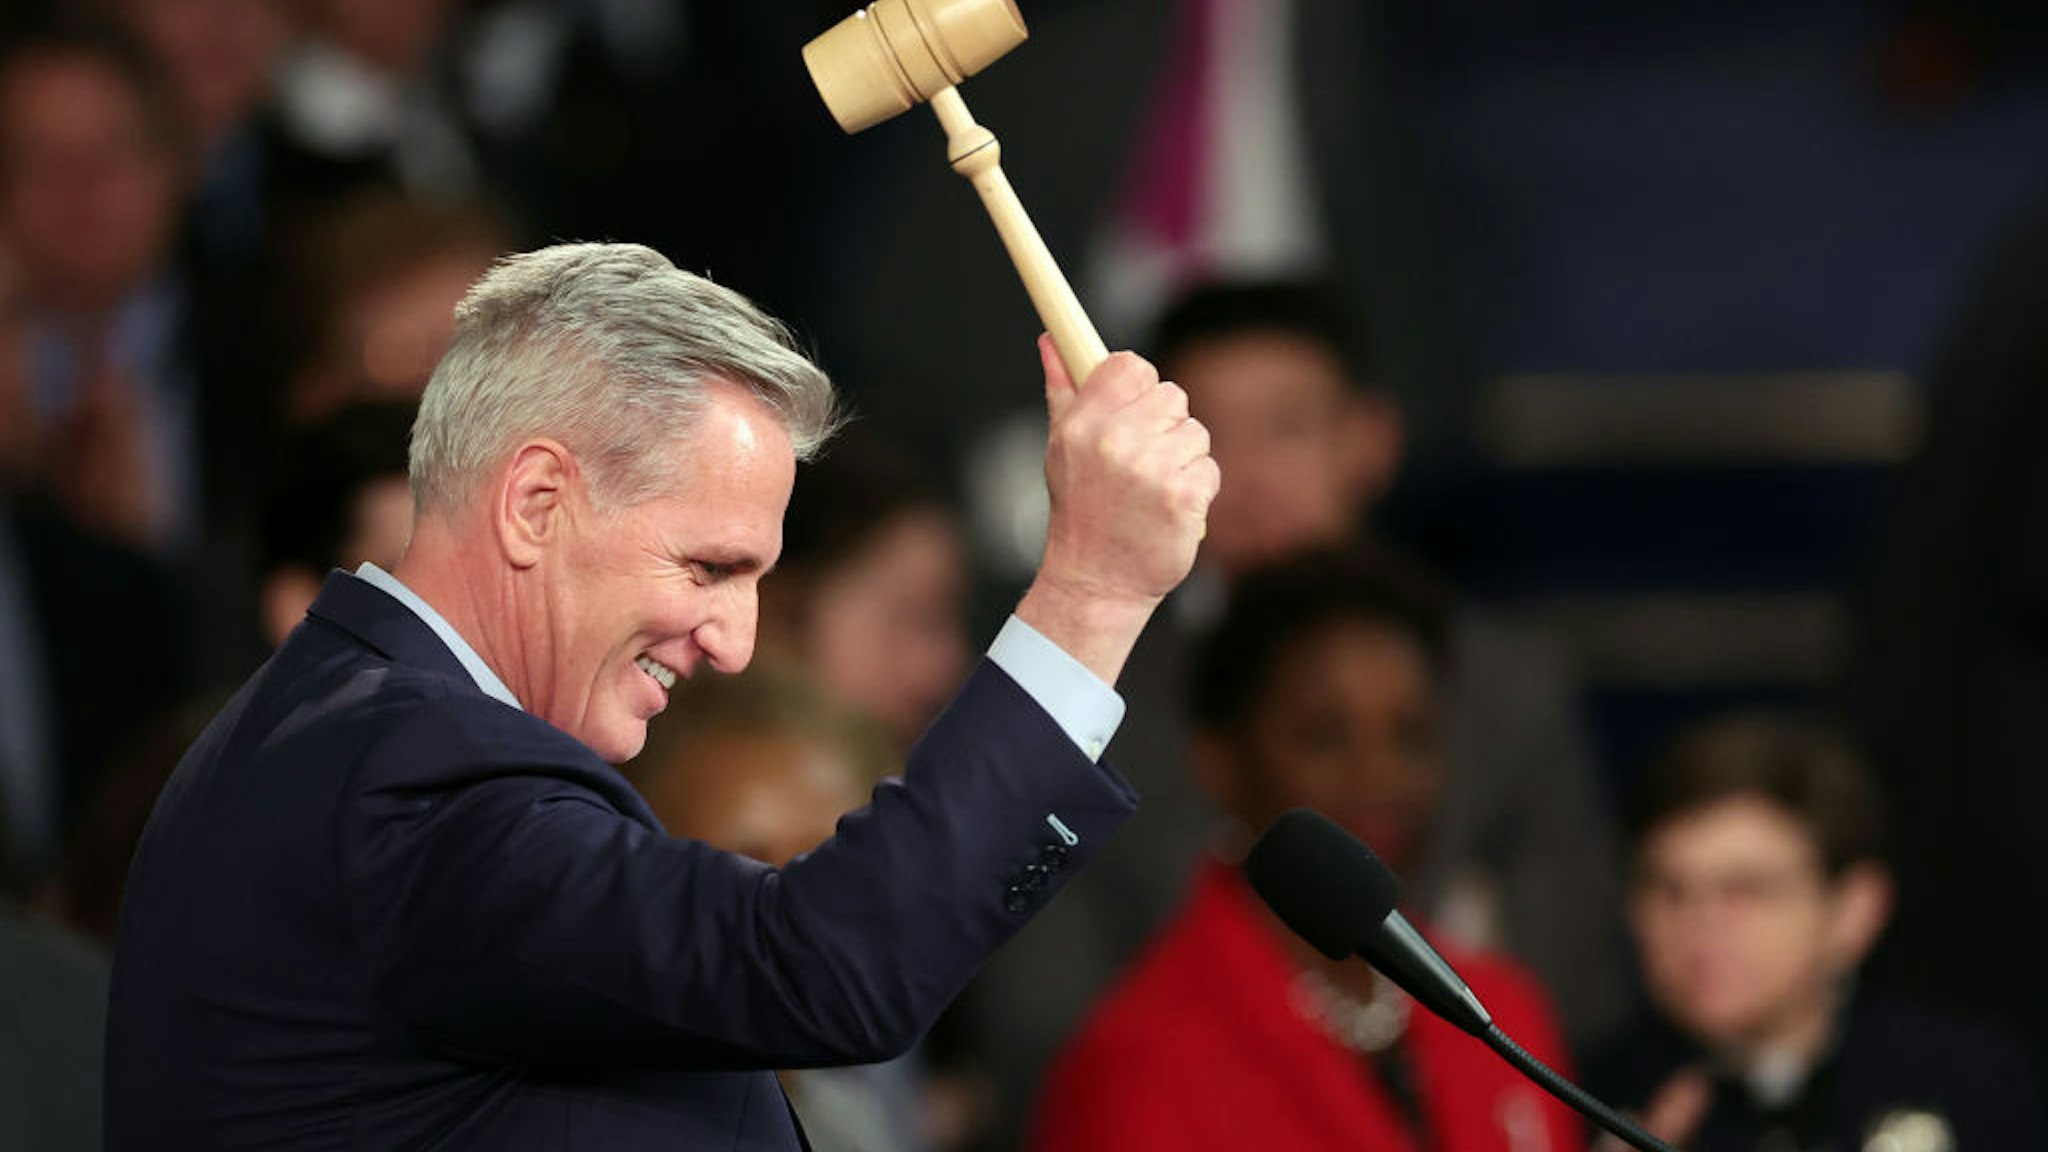 WASHINGTON, DC - JANUARY 07: U.S. Speaker of the House Kevin McCarthy (R-CA) celebrates with the gavel after being elected as Speaker in the House Chamber at the U.S. Capitol Building on January 07, 2023 in Washington, DC. After four days of voting and 15 ballots McCarthy secured enough votes to become Speaker of the House for the 118th Congress. (Photo by Win McNamee/Getty Images)